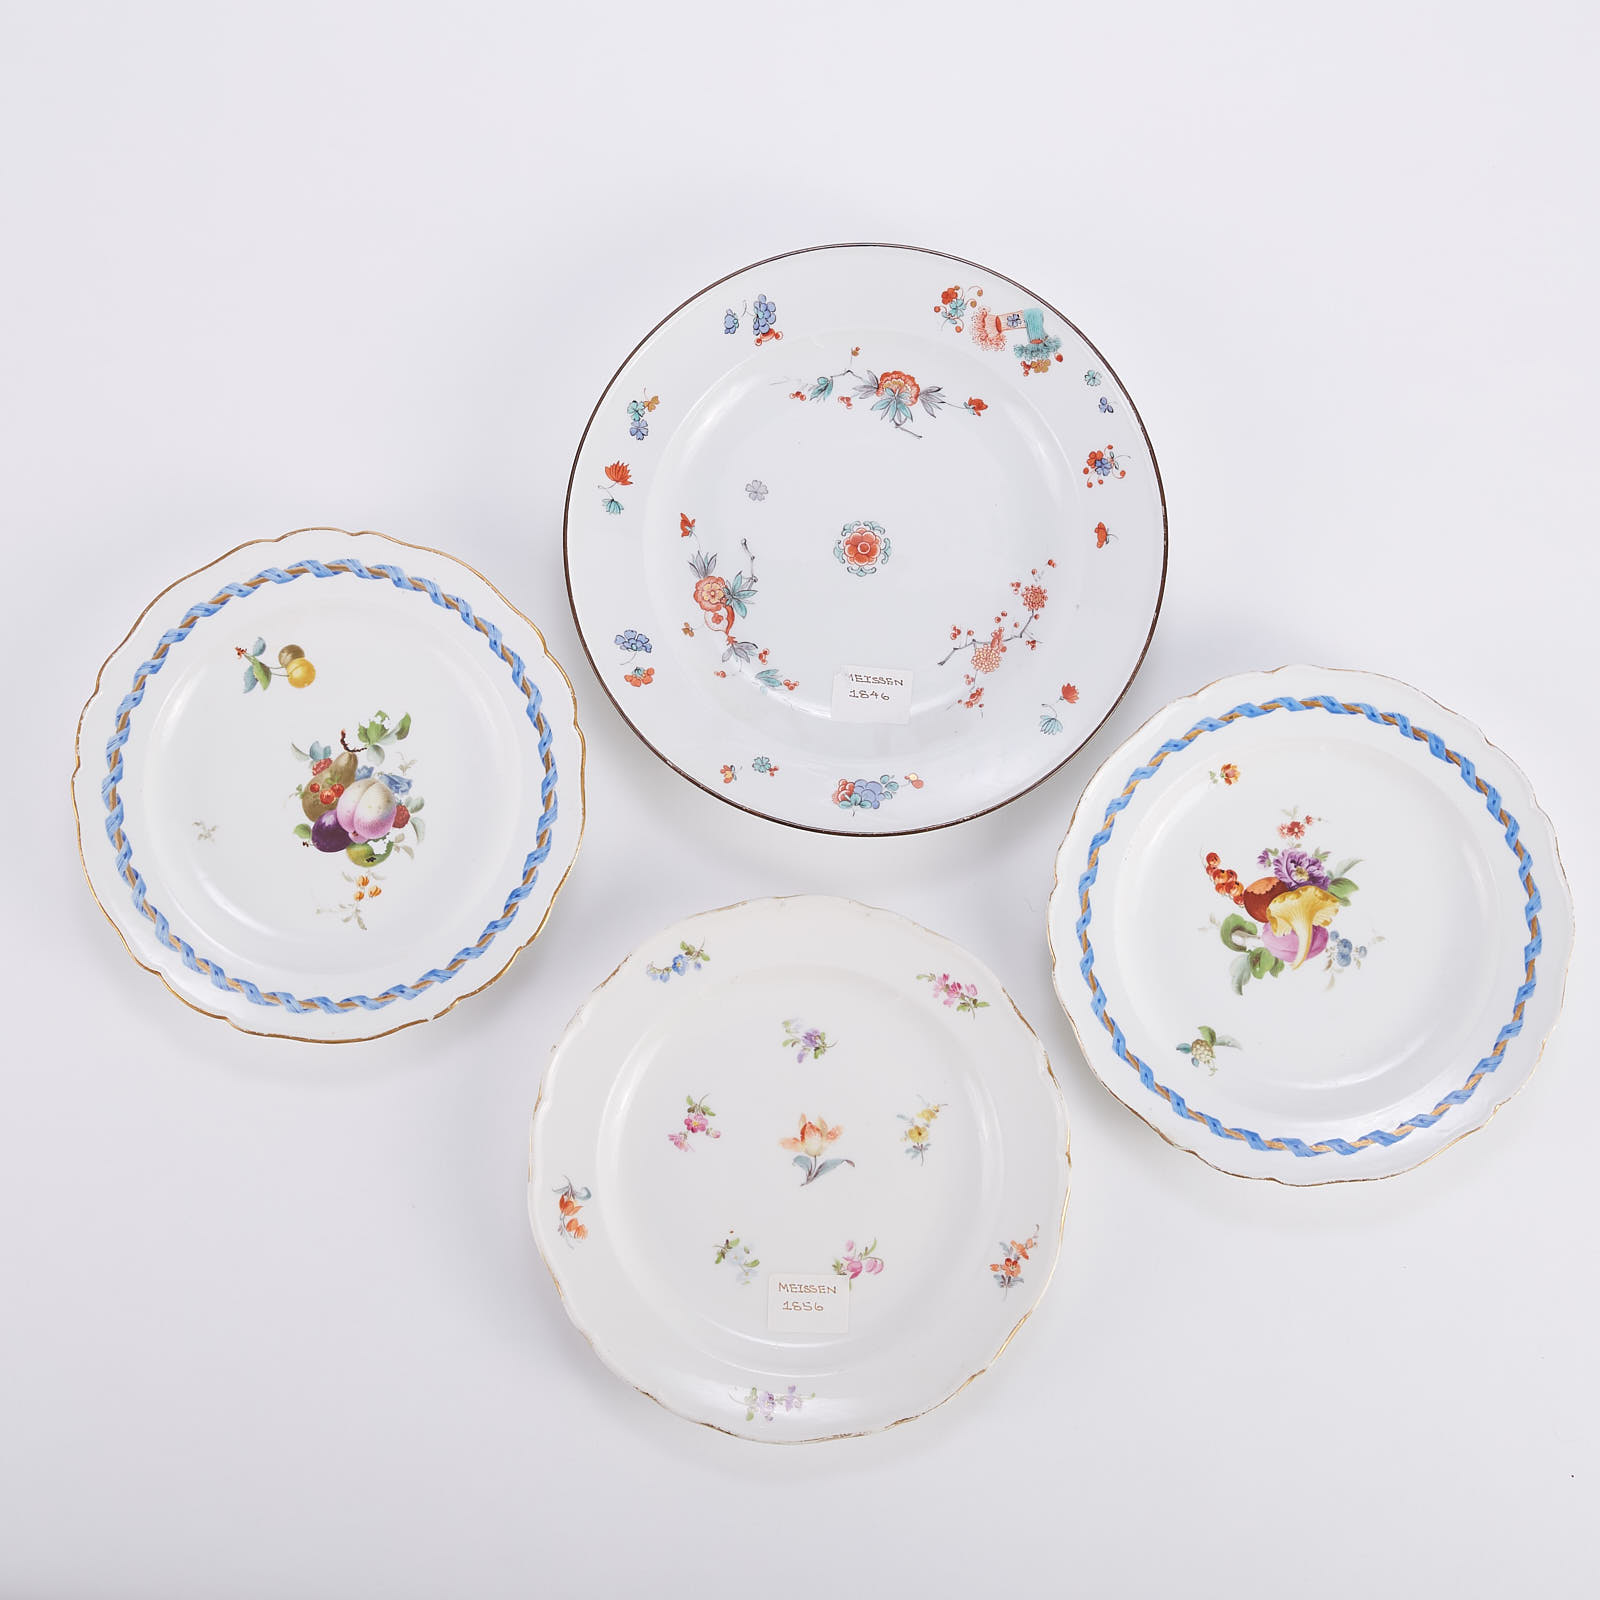 Lot 247: Group of 4 Early Meissen Plates